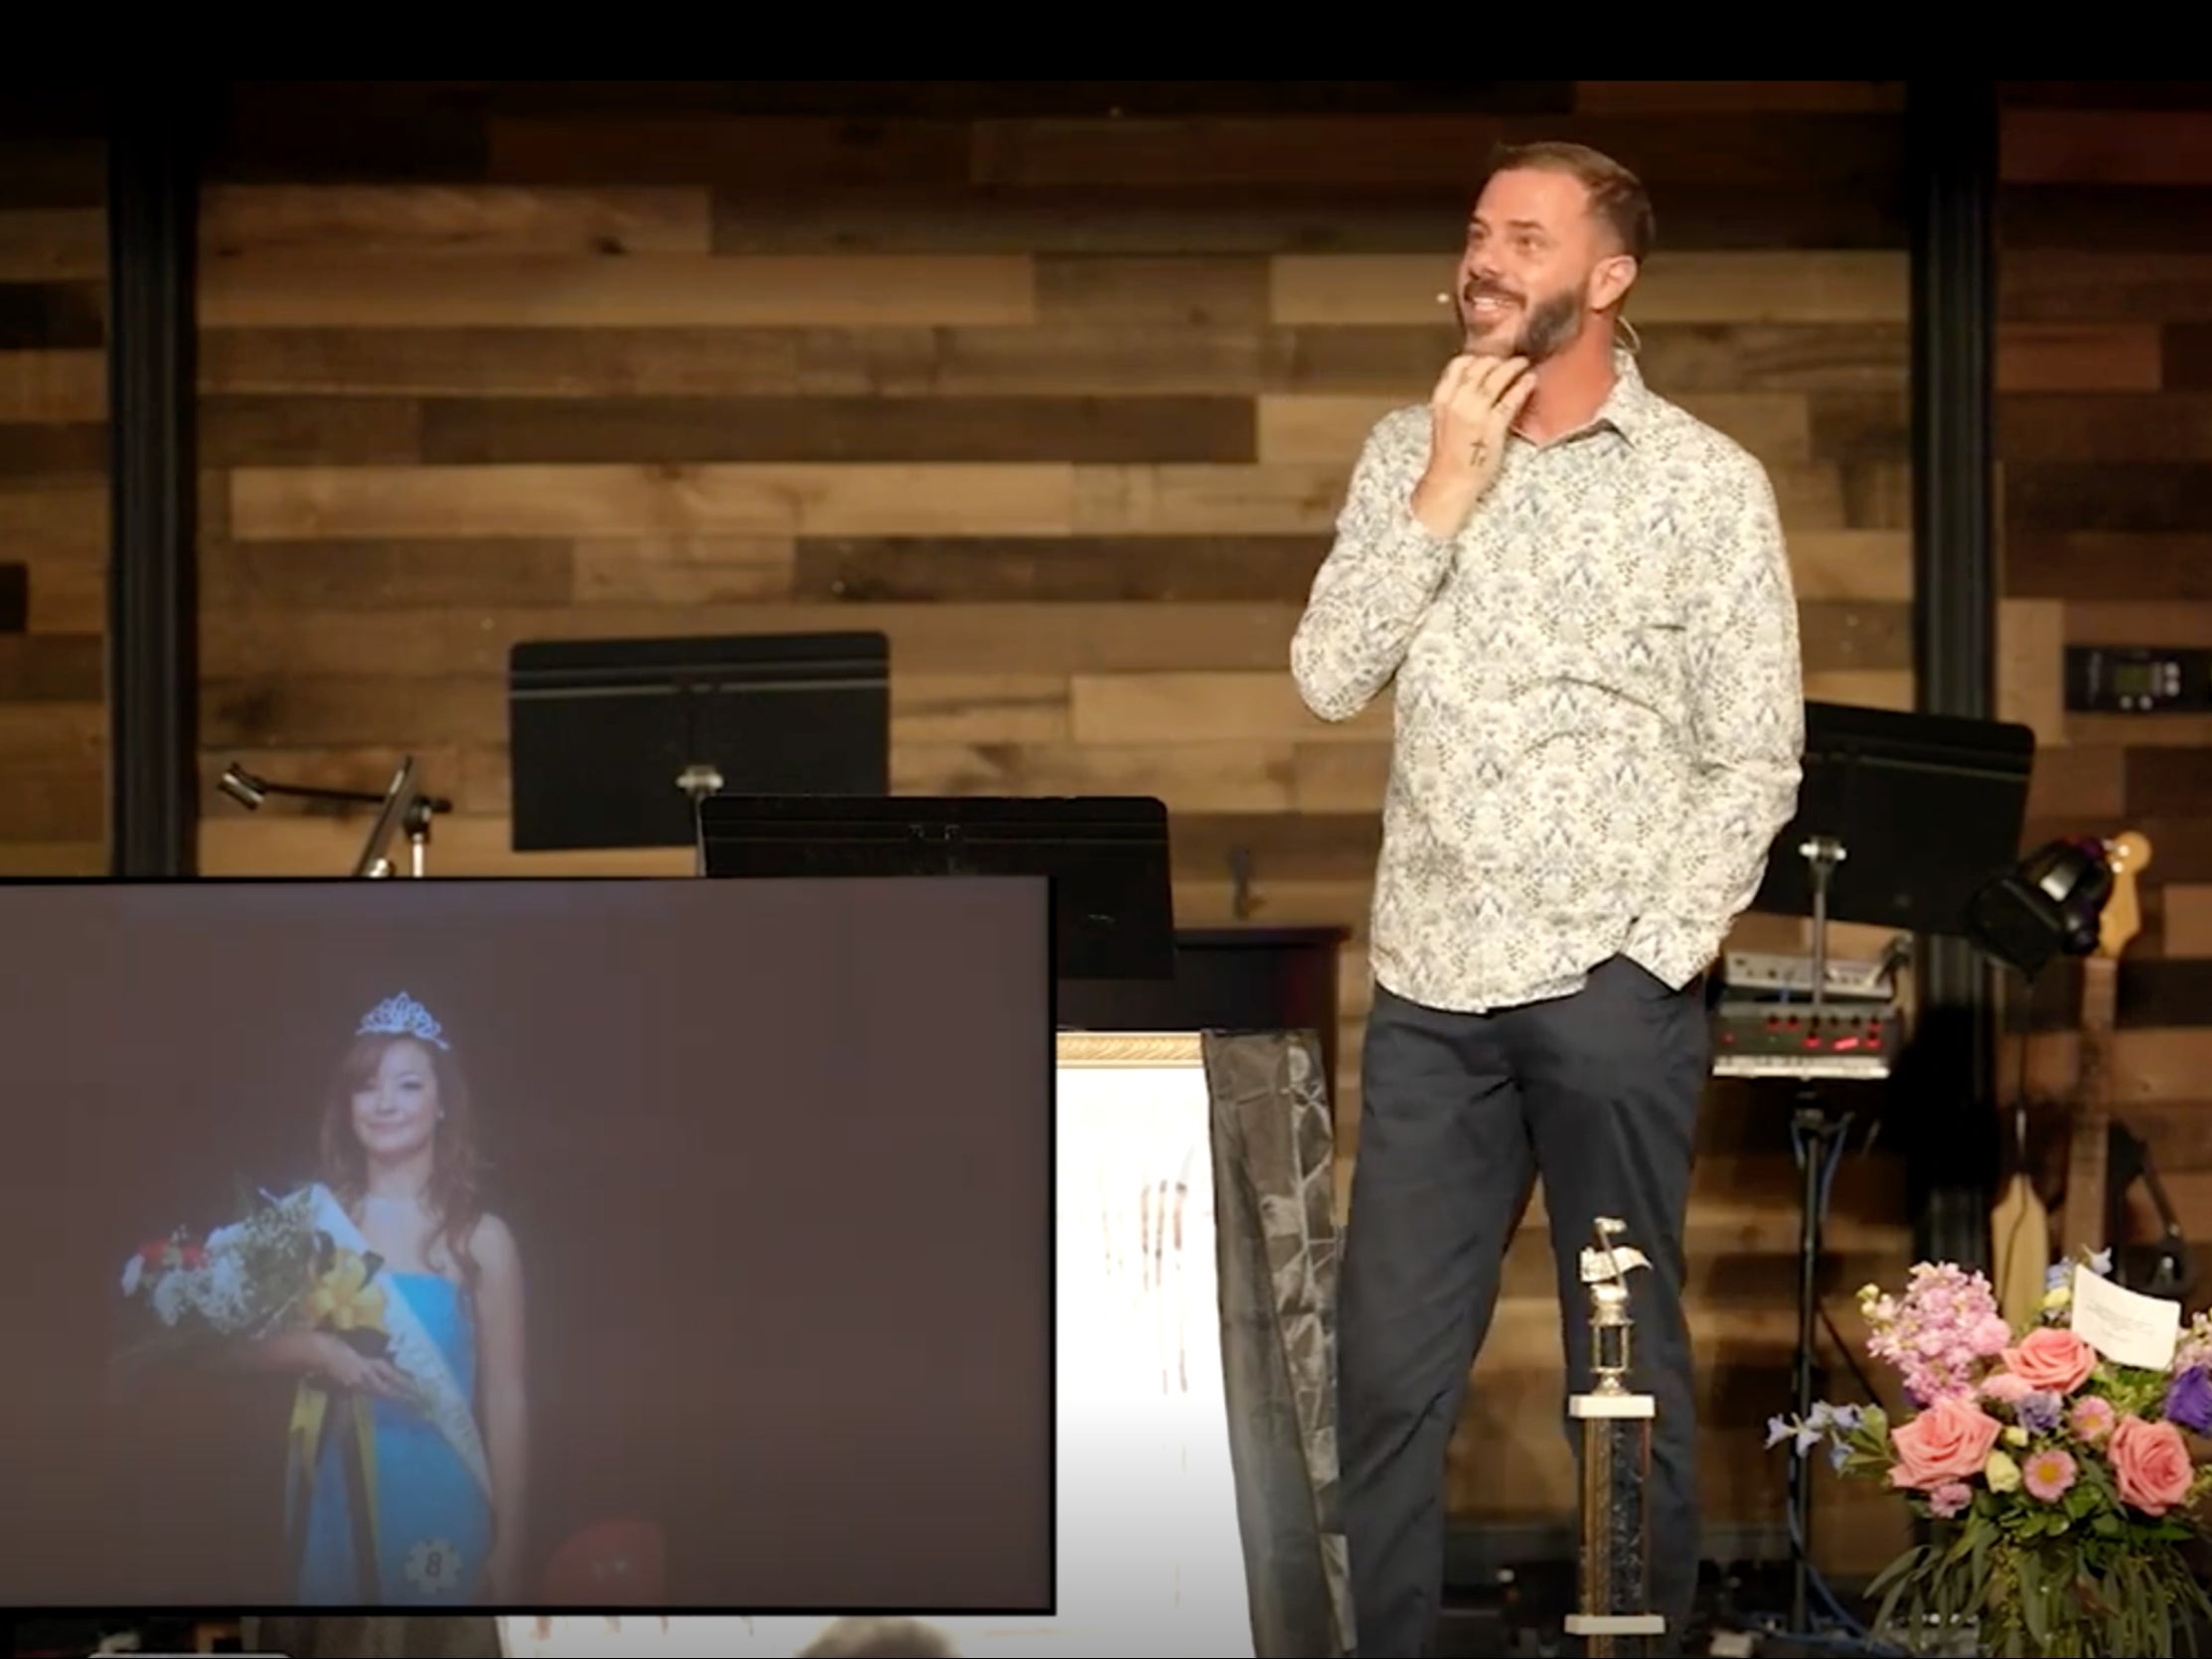 South Carolina pastor John-Paul Miller tells his congregation at Solid Rock Church in Myrtle Beach that he tried to raise his deceased wife Mica Miller ‘from the dead’. Mica appears in a photo to the left of Mr Miller.